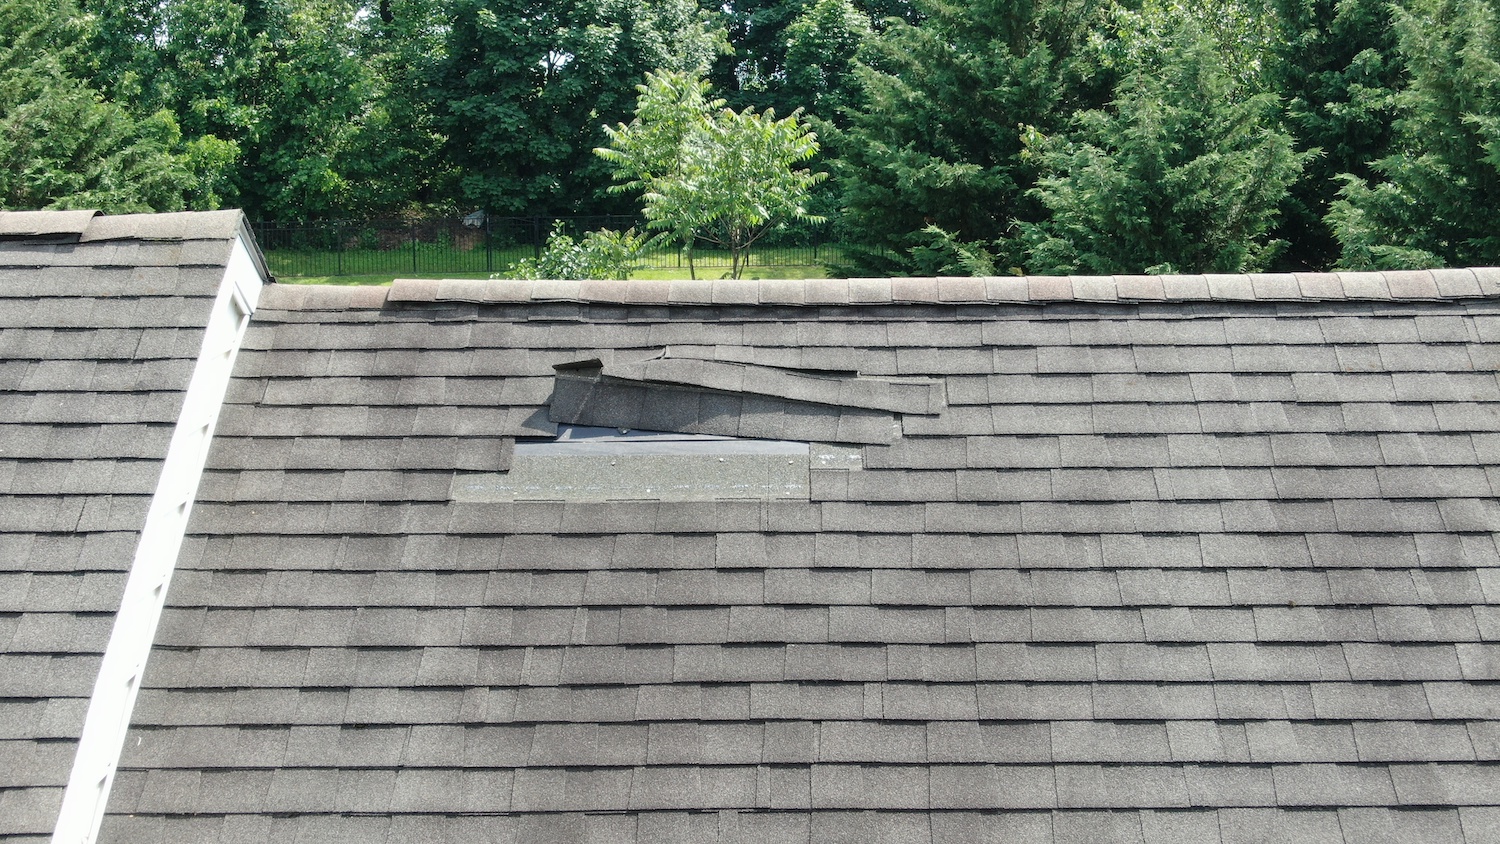 loose shingles on the roof